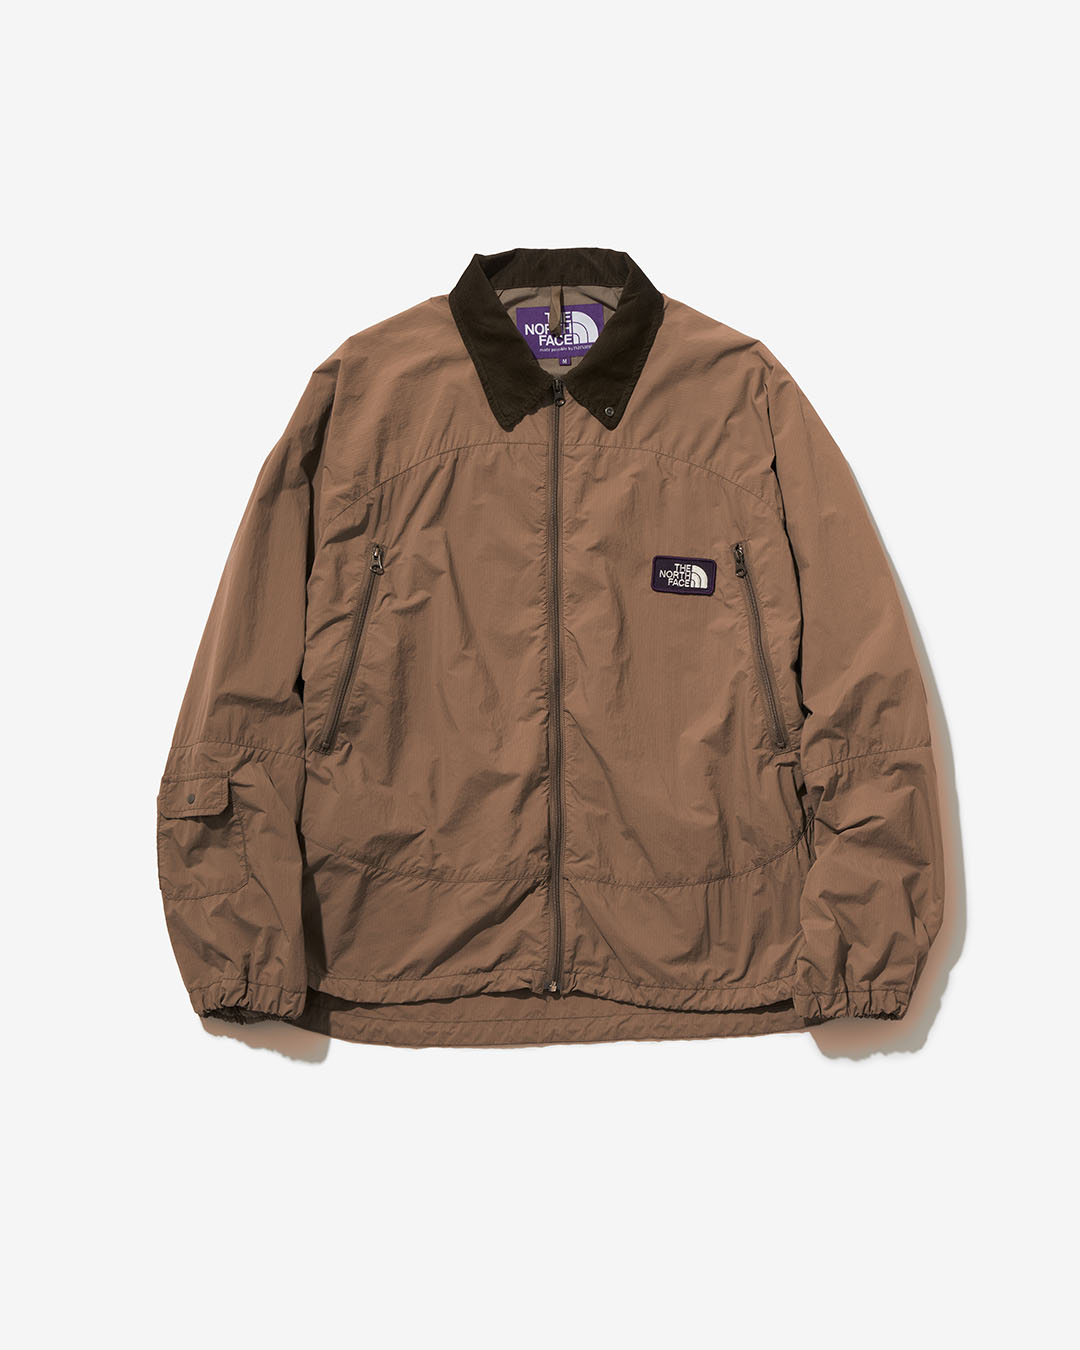 nanamica / THE NORTH FACE PURPLE LABEL / Featured Product vol.69